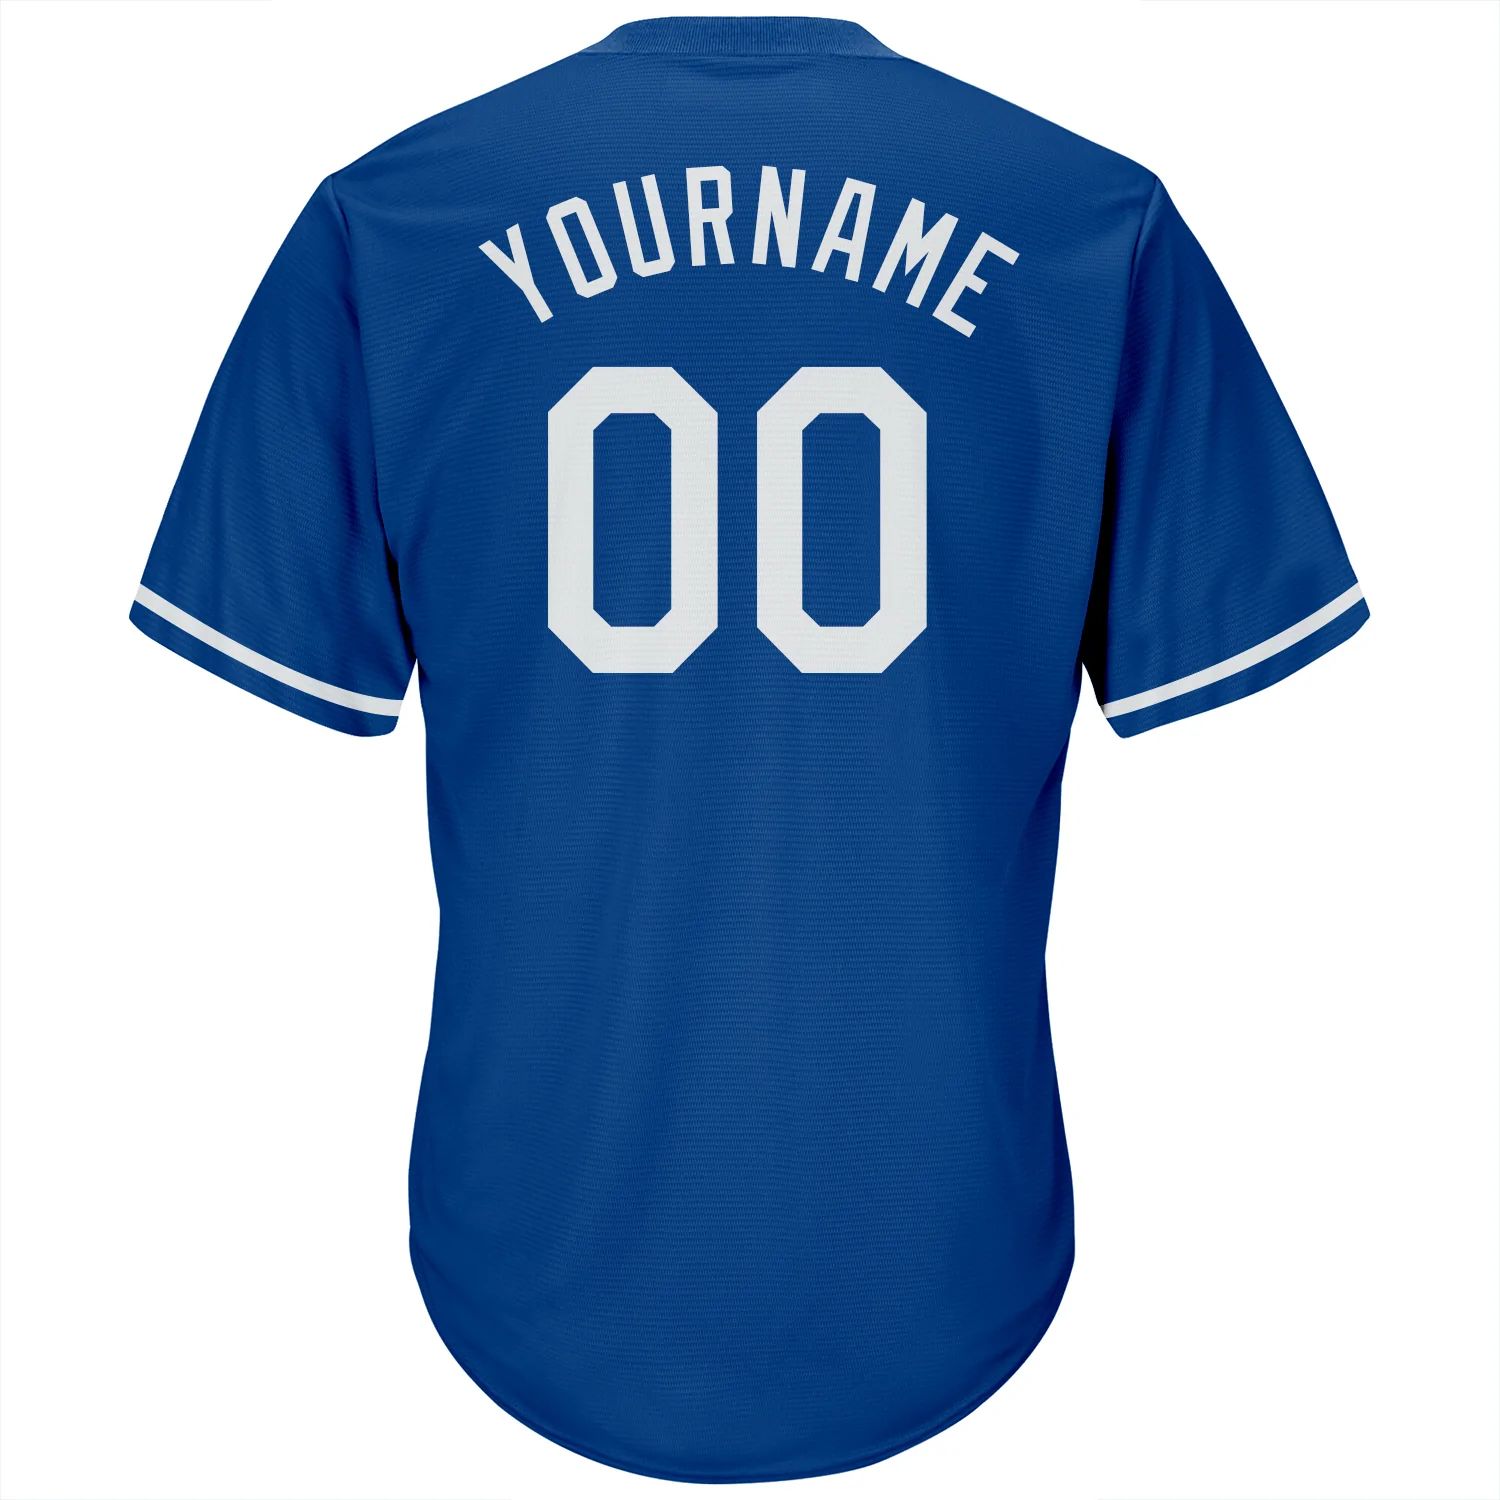 build-red-royal-baseball-white-jersey-authentic-throwback-eroyal00416-online-3.jpg